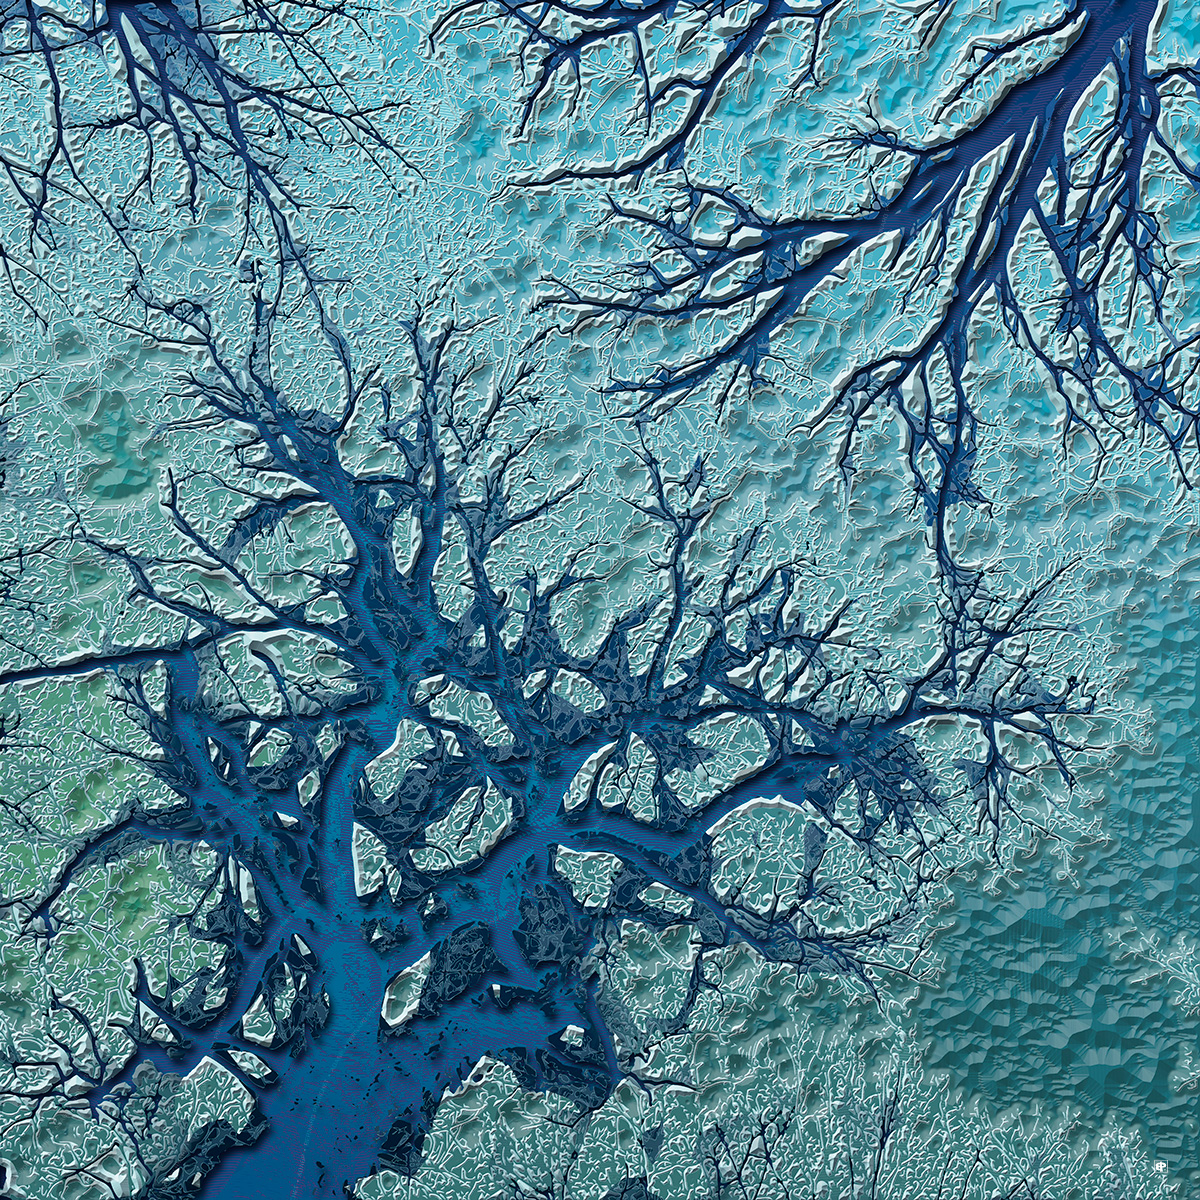 Capturing the Essence of Nature: A New Series of Breathtaking Digital Prints